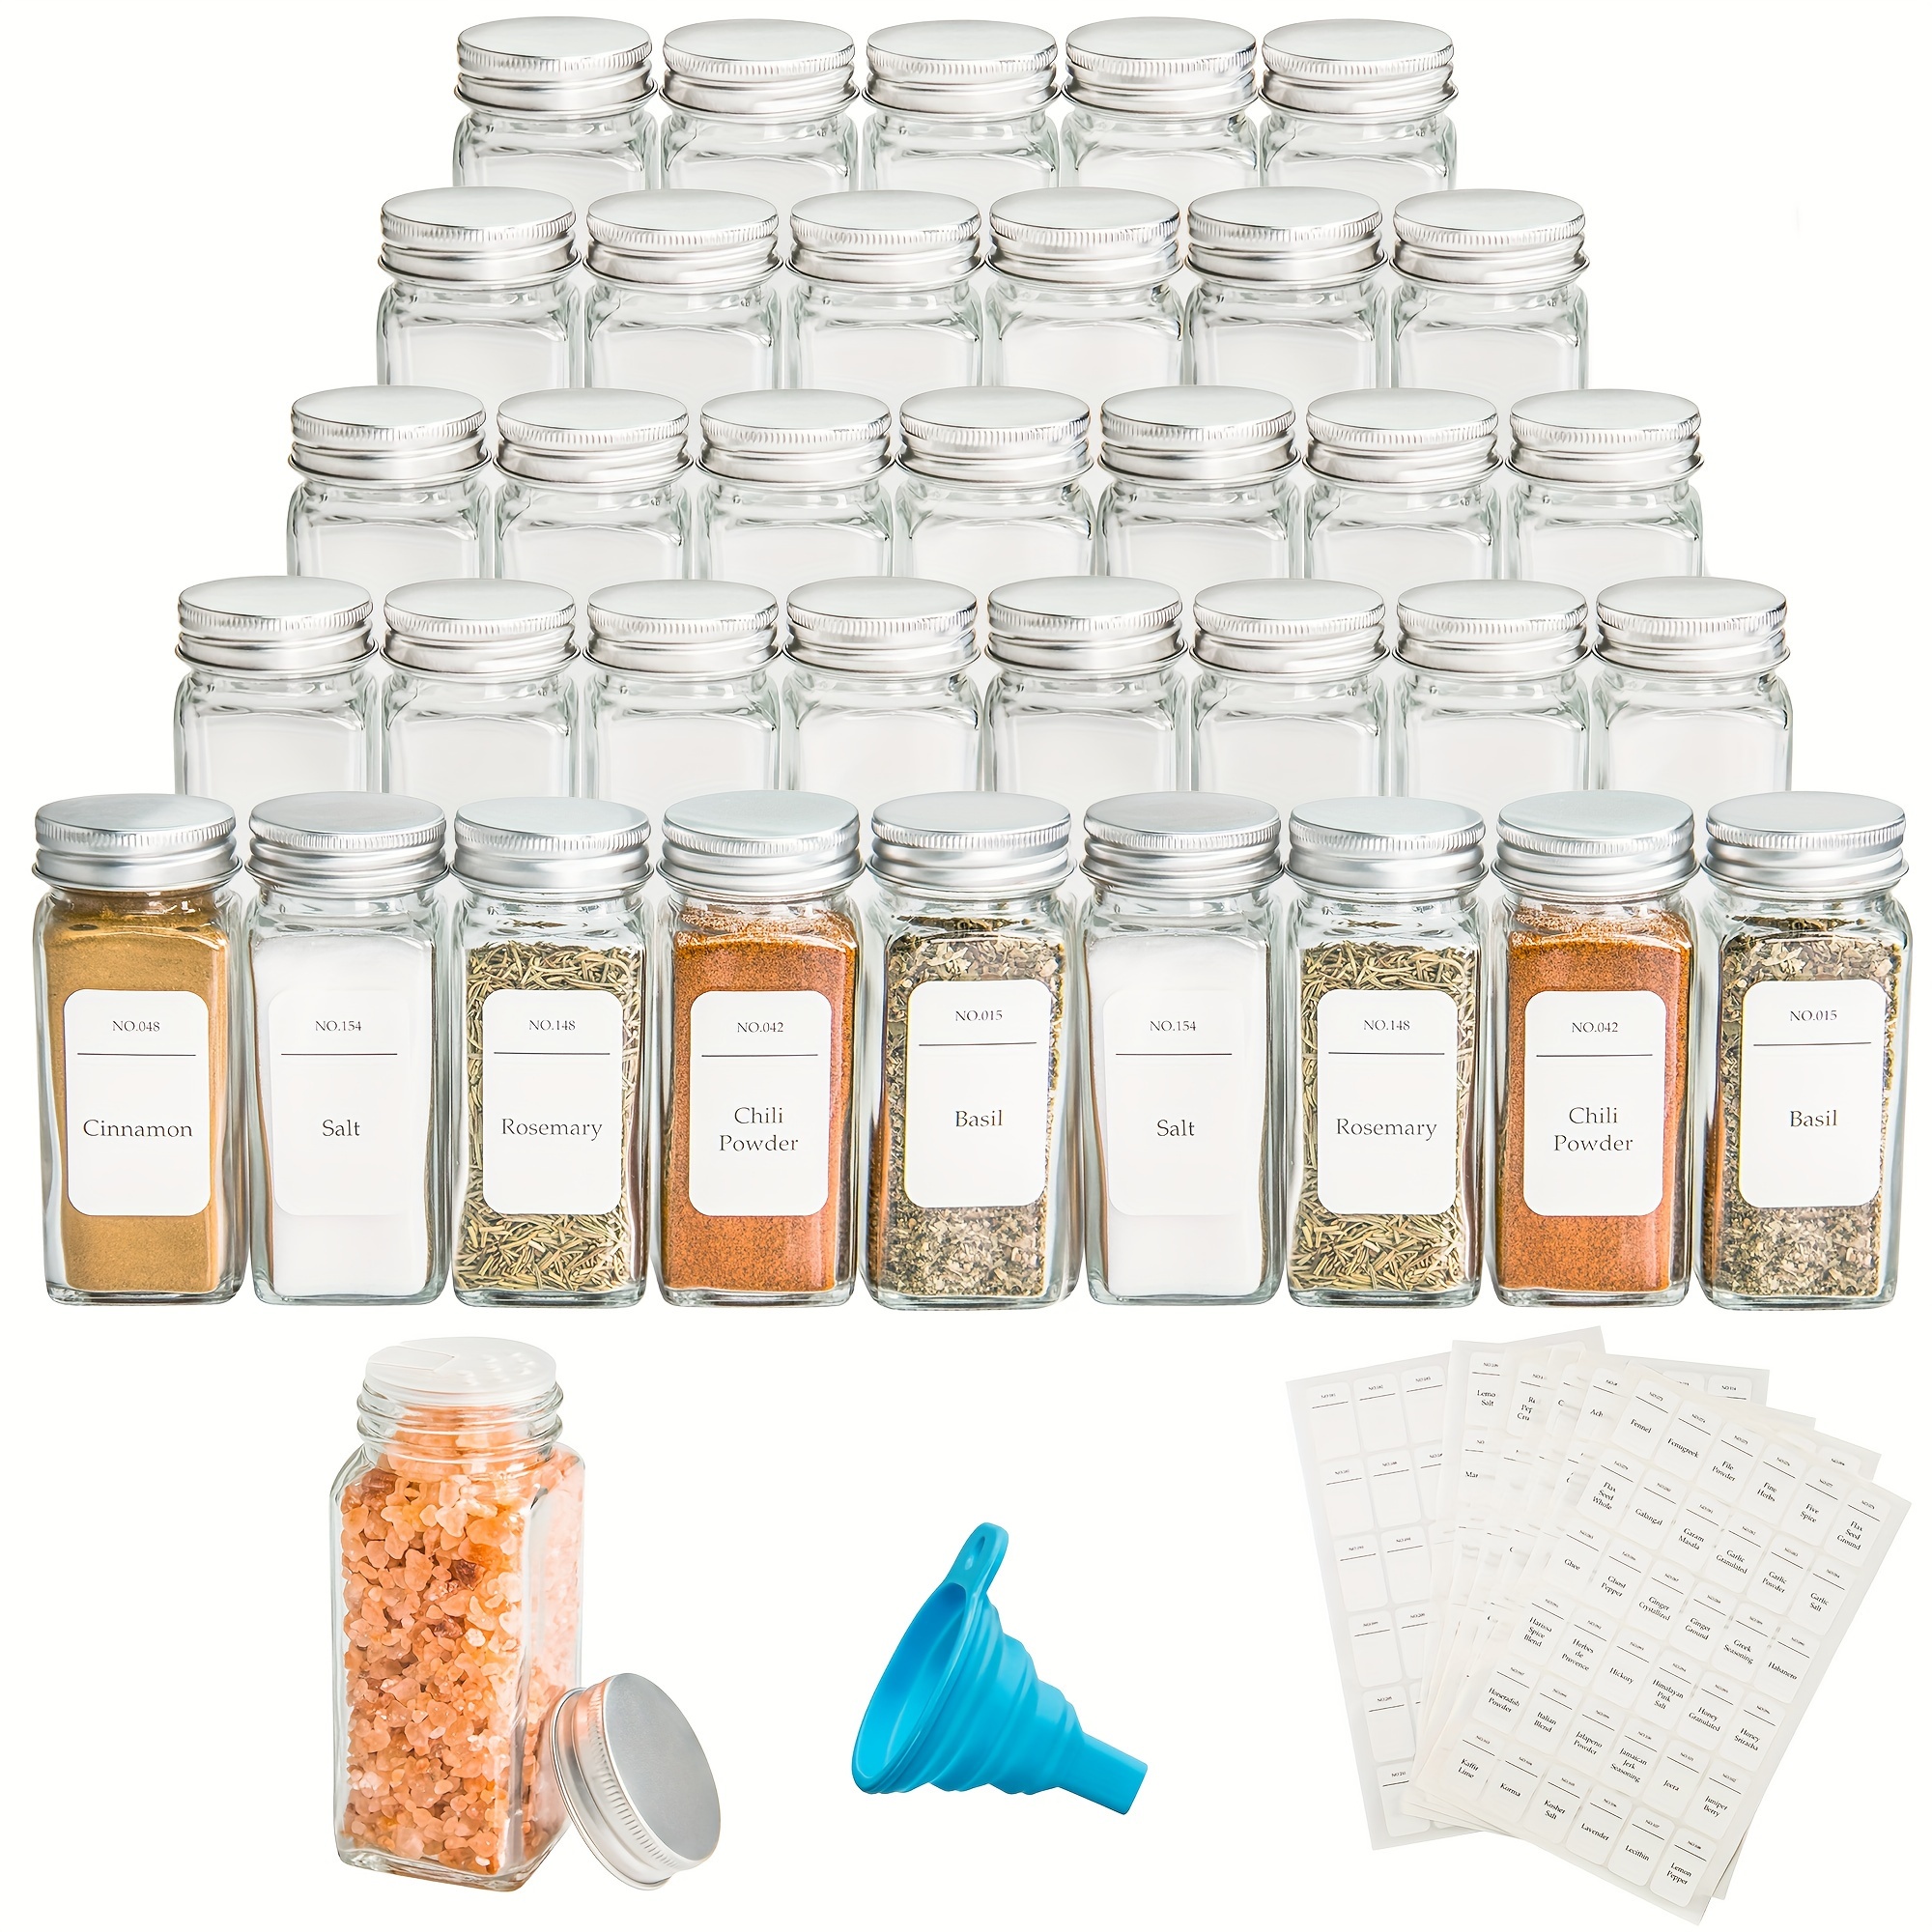 Spice Jars With Spice Labels, Empty Glass Spice Containers With